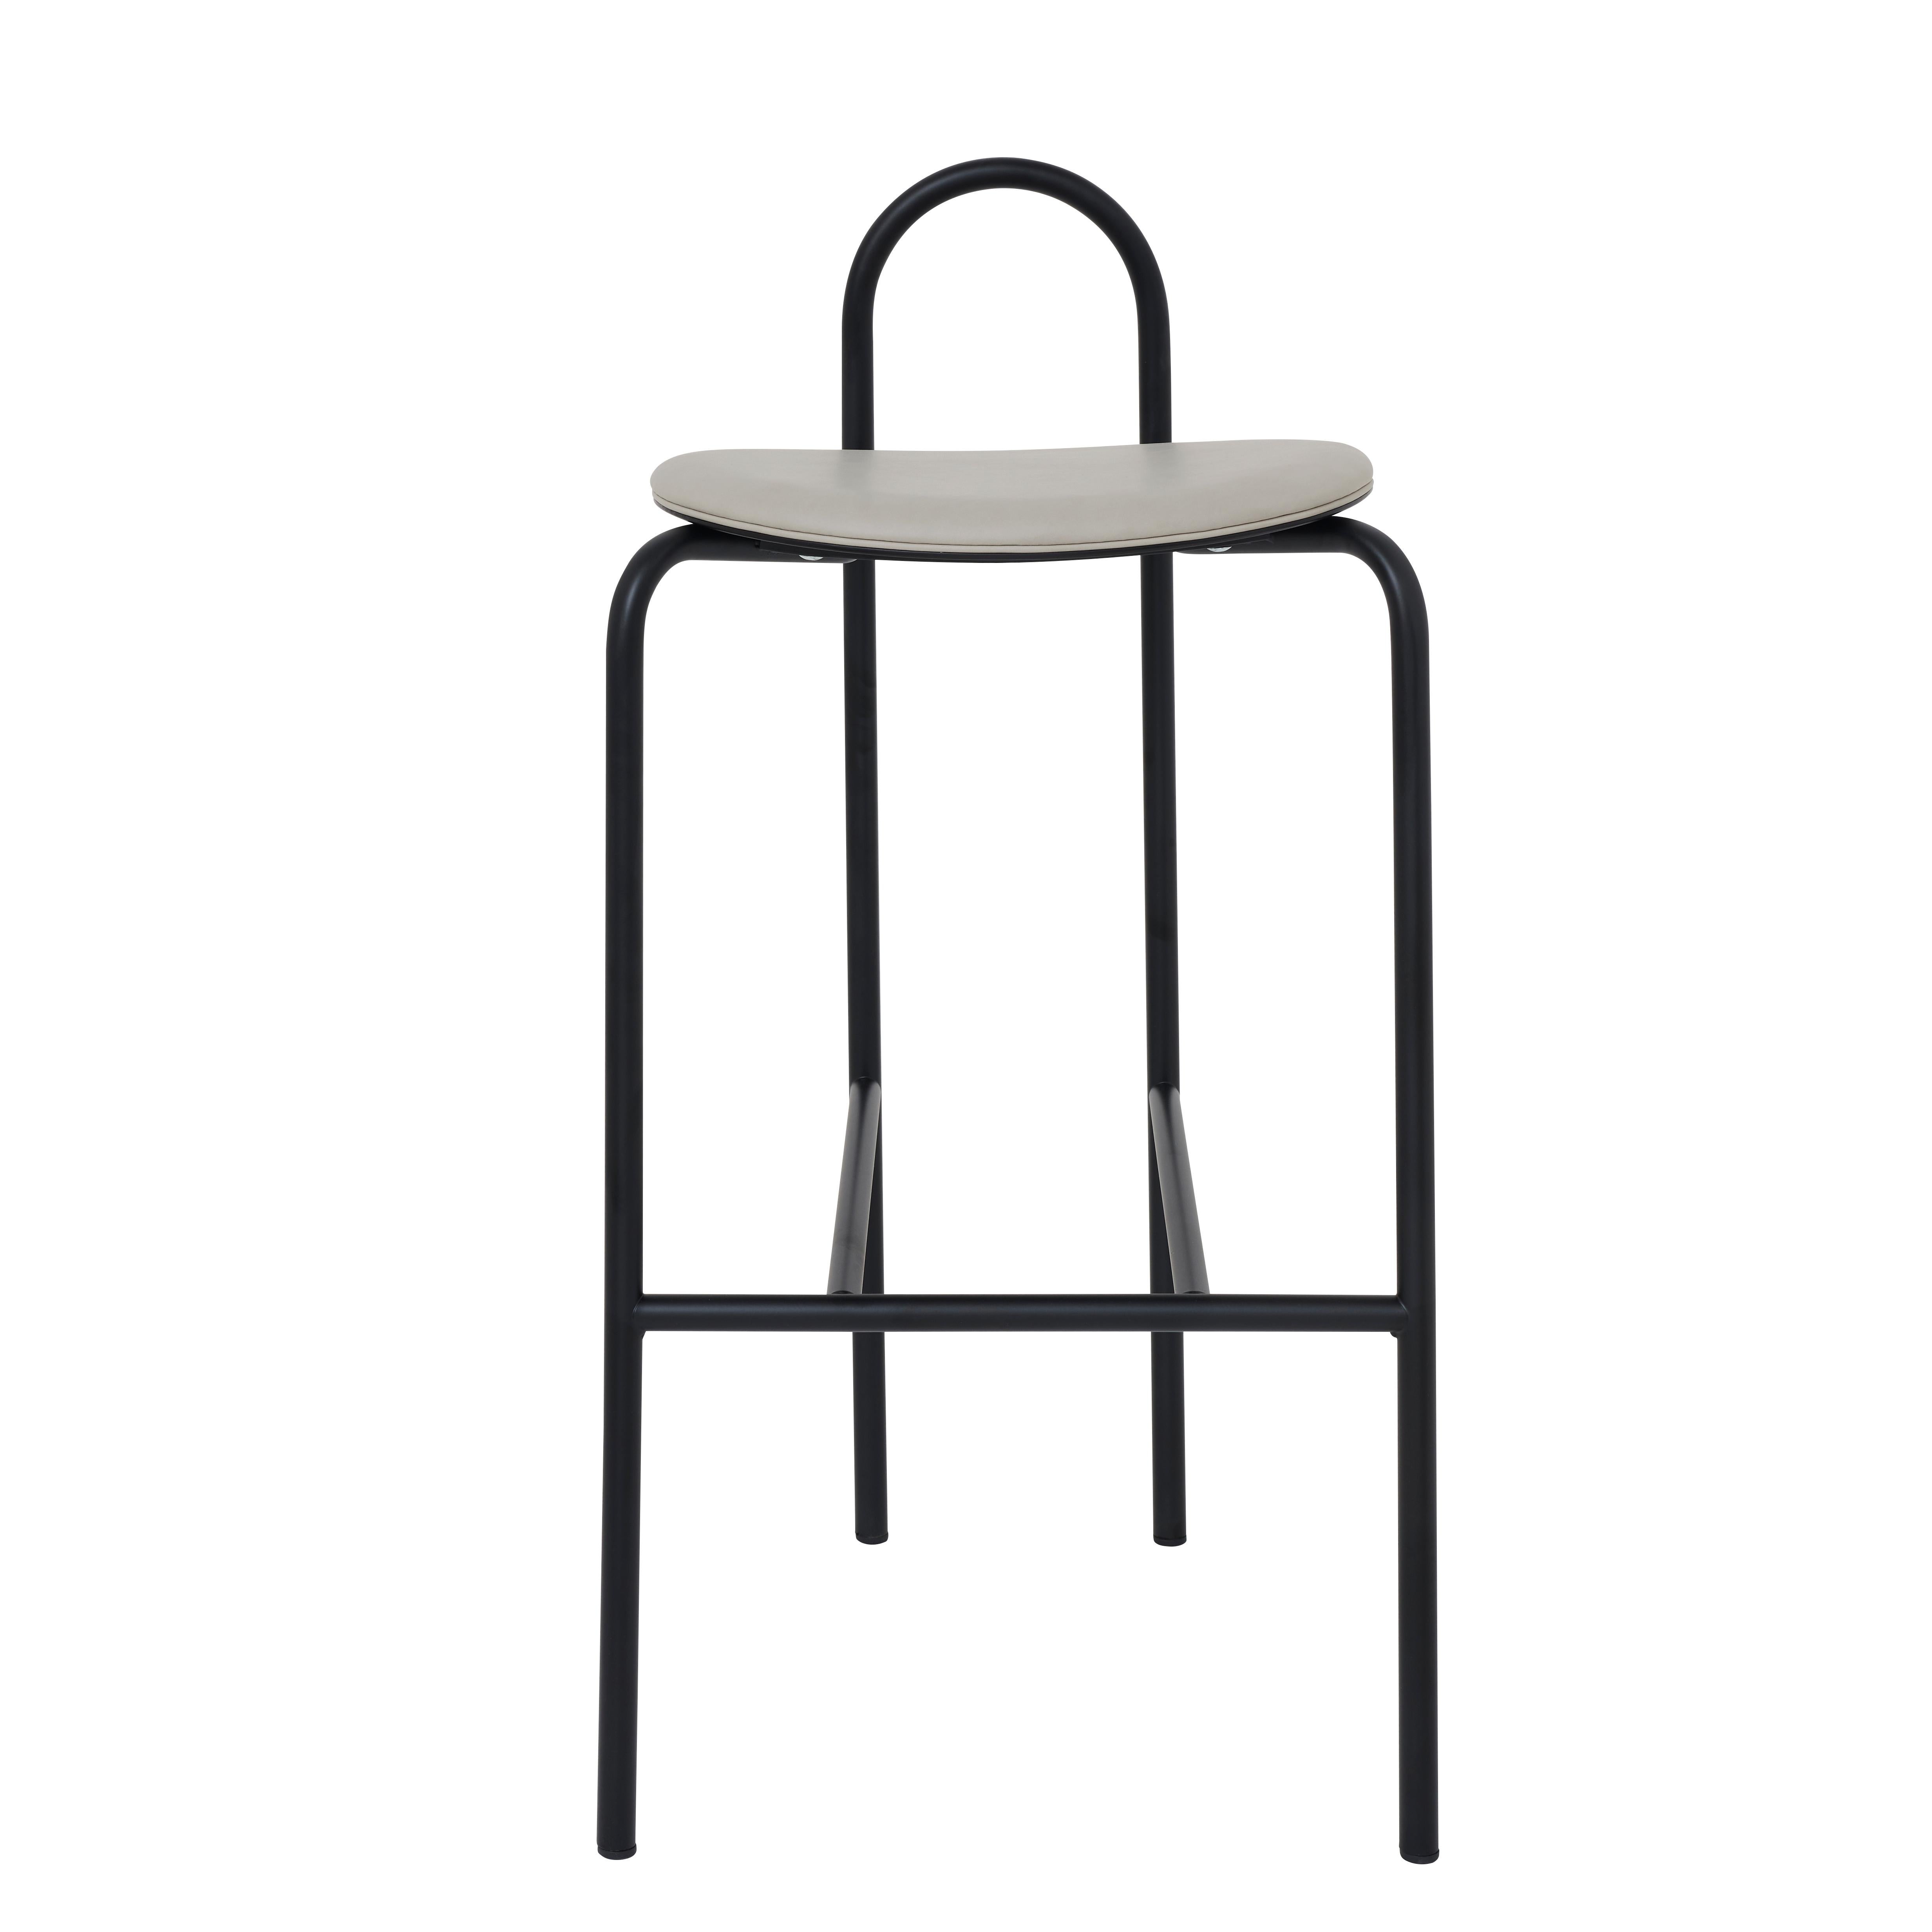 A natural extension to the popular Michelle chair, the Michelle stool continues to play on the visual application of the arc, creating a simple, striking and highly adaptable stool for any interior.

About this finishing:
Seat: Edinburgh Mist